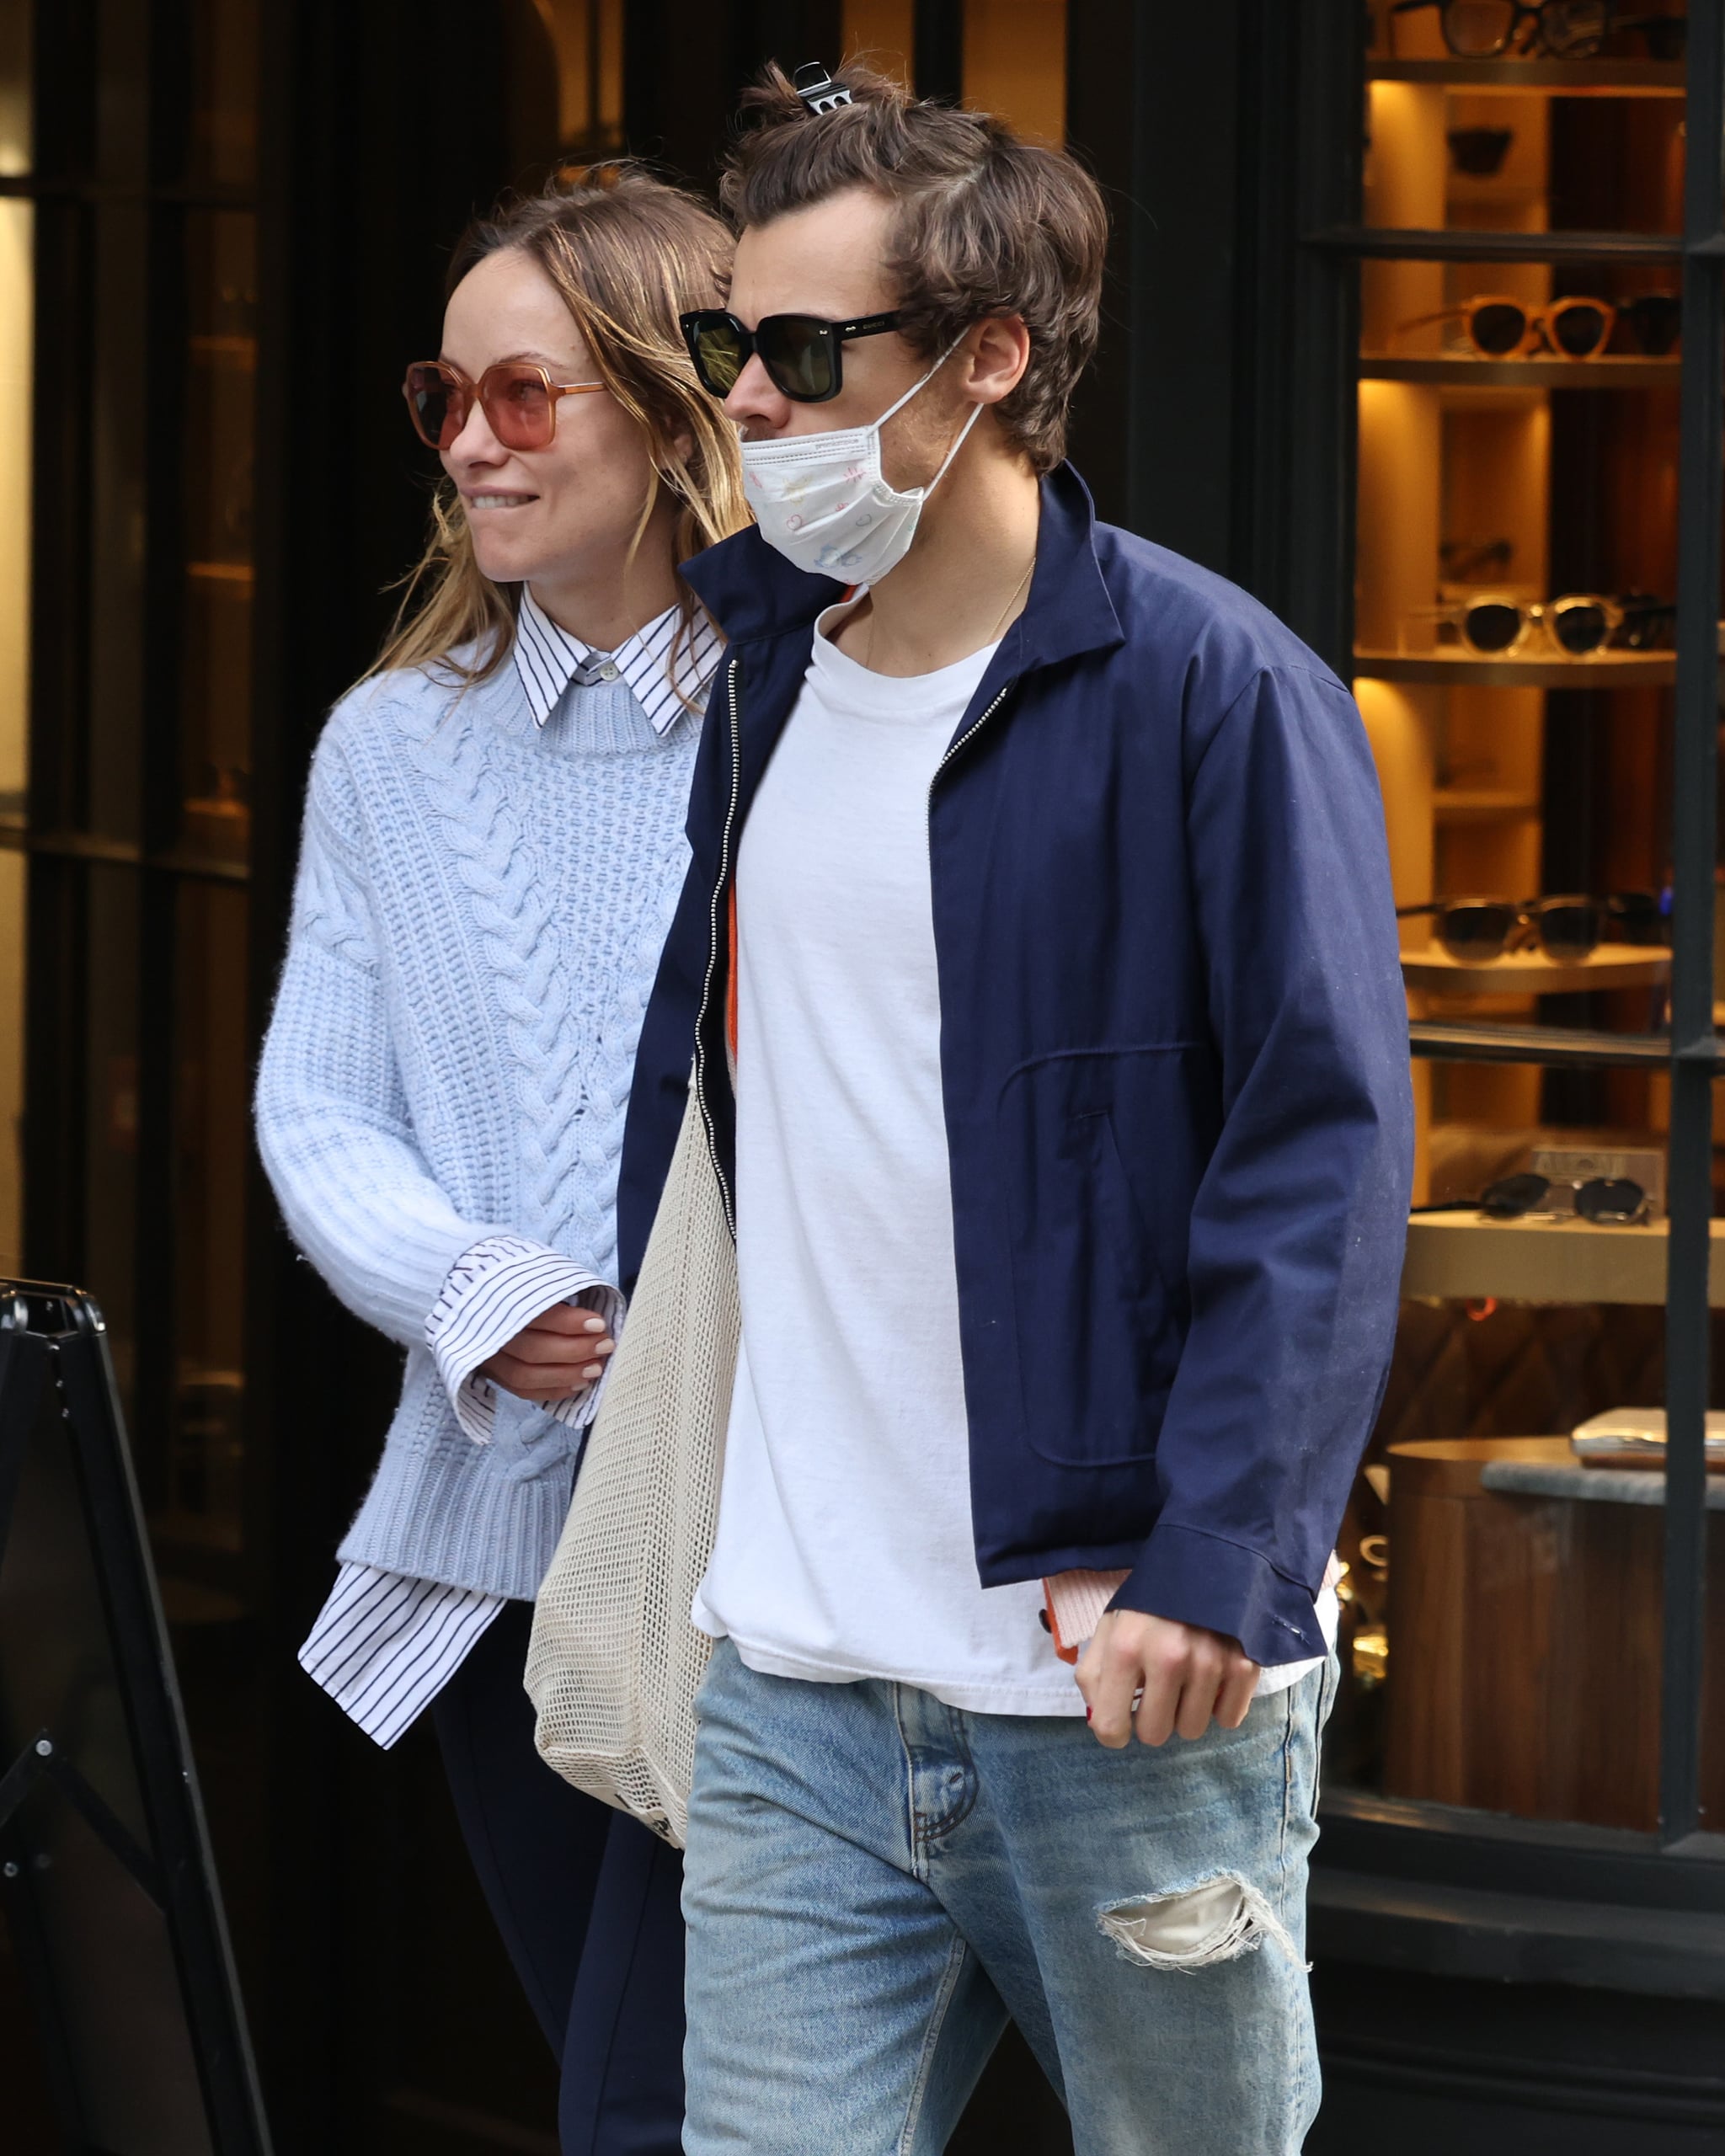 Harry Styles and Olivia Wilde Spotted Out in London | POPSUGAR Celebrity